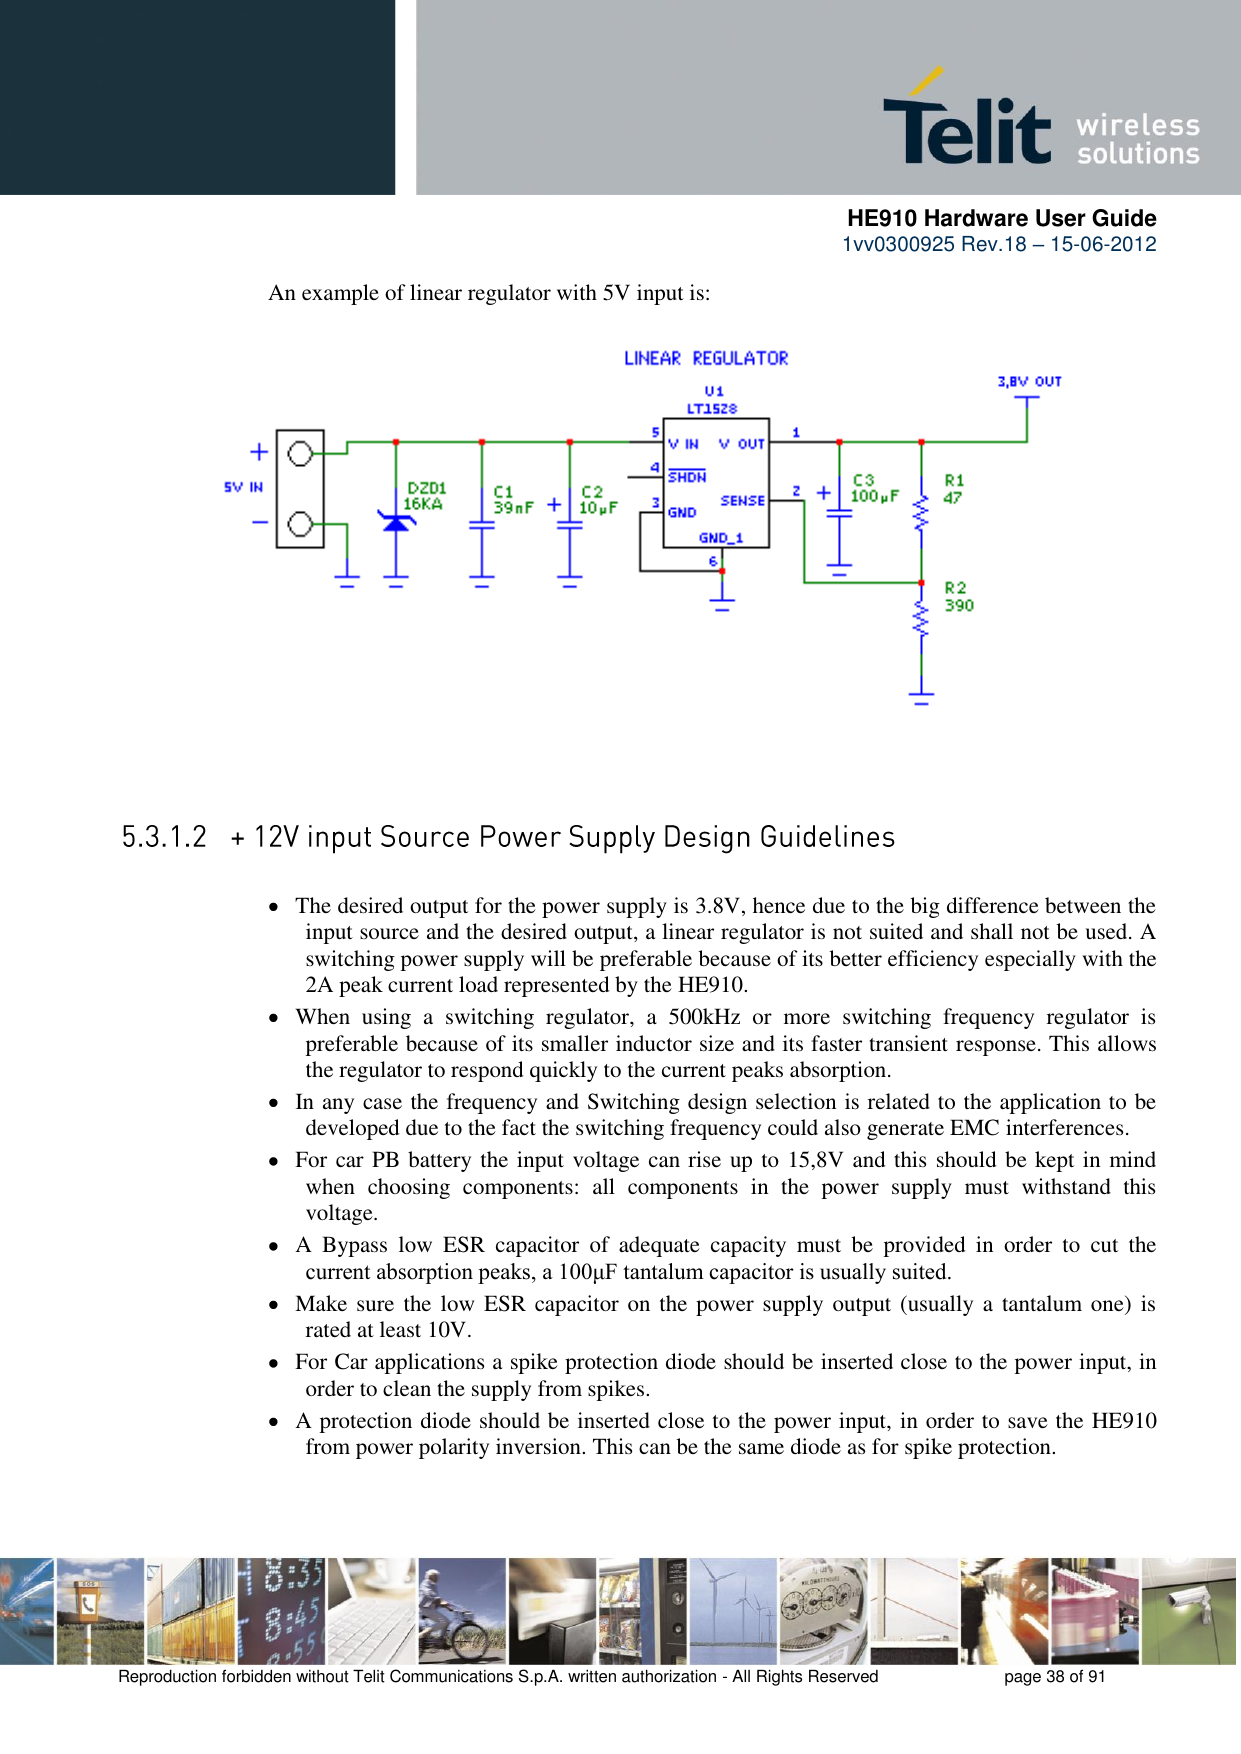      HE910 Hardware User Guide 1vv0300925 Rev.18 – 15-06-2012    Reproduction forbidden without Telit Communications S.p.A. written authorization - All Rights Reserved    page 38 of 91  An example of linear regulator with 5V input is:   The desired output for the power supply is 3.8V, hence due to the big difference between the input source and the desired output, a linear regulator is not suited and shall not be used. A switching power supply will be preferable because of its better efficiency especially with the 2A peak current load represented by the HE910.  When  using  a  switching  regulator,  a  500kHz  or  more  switching  frequency  regulator  is preferable because of its smaller inductor size and its faster transient response. This allows the regulator to respond quickly to the current peaks absorption.   In any case the frequency and Switching design selection is related to the application to be developed due to the fact the switching frequency could also generate EMC interferences.  For car PB battery the input voltage can rise up to 15,8V and this should be kept in mind when  choosing  components:  all  components  in  the  power  supply  must  withstand  this voltage.  A  Bypass  low  ESR  capacitor  of  adequate  capacity  must  be  provided  in  order  to  cut  the current absorption peaks, a 100μF tantalum capacitor is usually suited.  Make sure  the low ESR capacitor on the power supply output (usually a tantalum one) is rated at least 10V.  For Car applications a spike protection diode should be inserted close to the power input, in order to clean the supply from spikes.   A protection diode should be inserted close to the power input, in order to save the HE910 from power polarity inversion. This can be the same diode as for spike protection. 